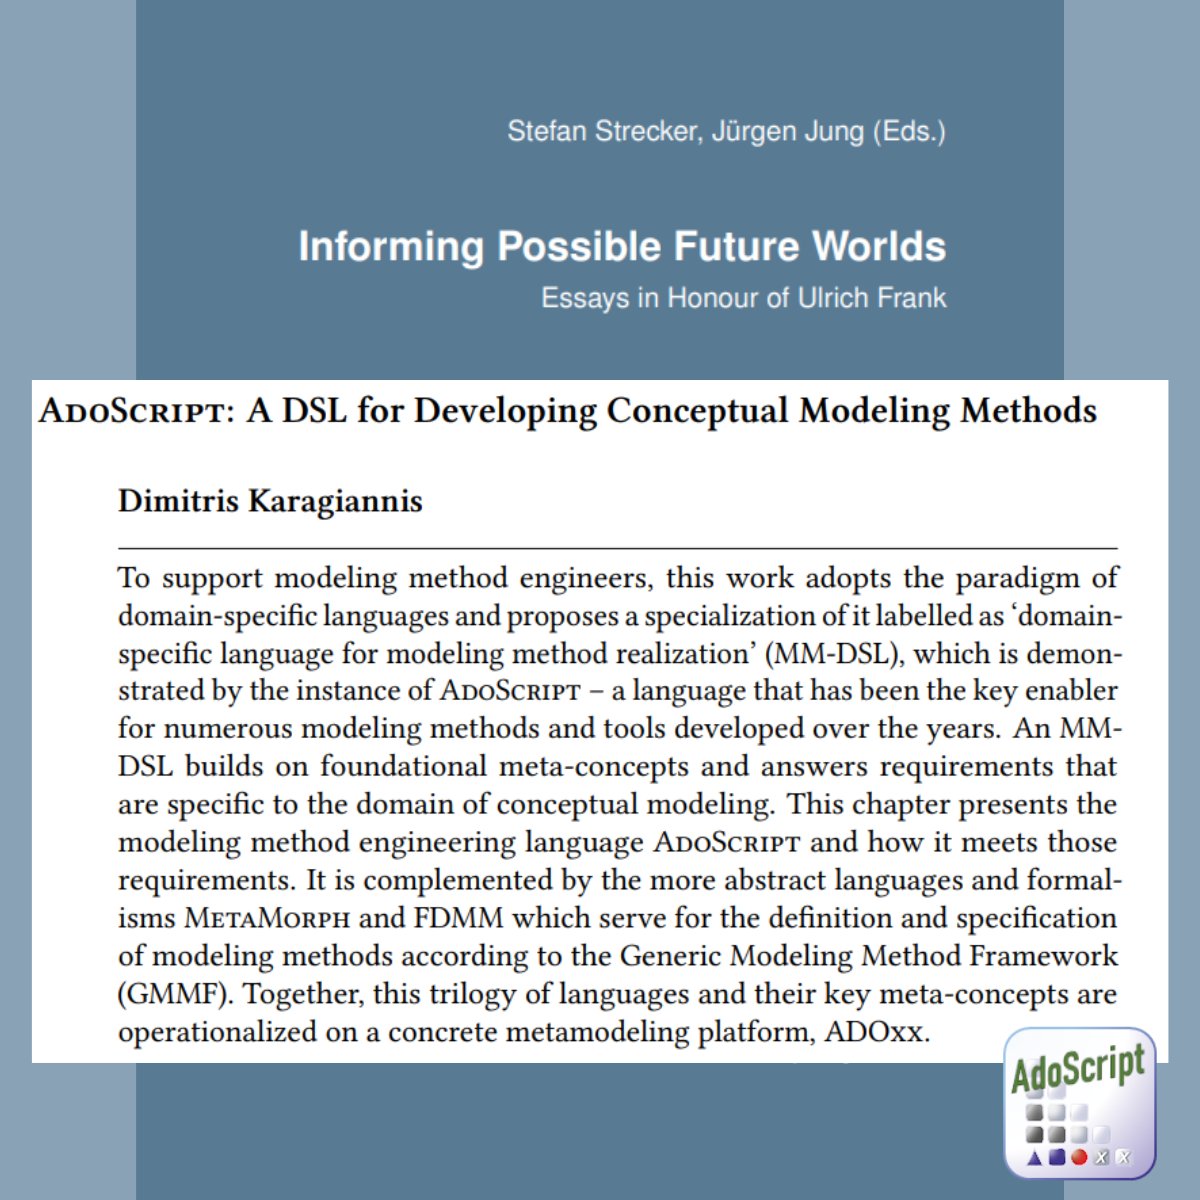 #communitynews Professor Karagiannis @csunivie contributed to the Festschrift 'Informing Possible Future Worlds. Essays in honor of Ulrich Frank' with a paper about 'ADOScript: A DSL for Developing Conceptual Modeling Methods'! #conceptualmodeling #metamodeling #DSL